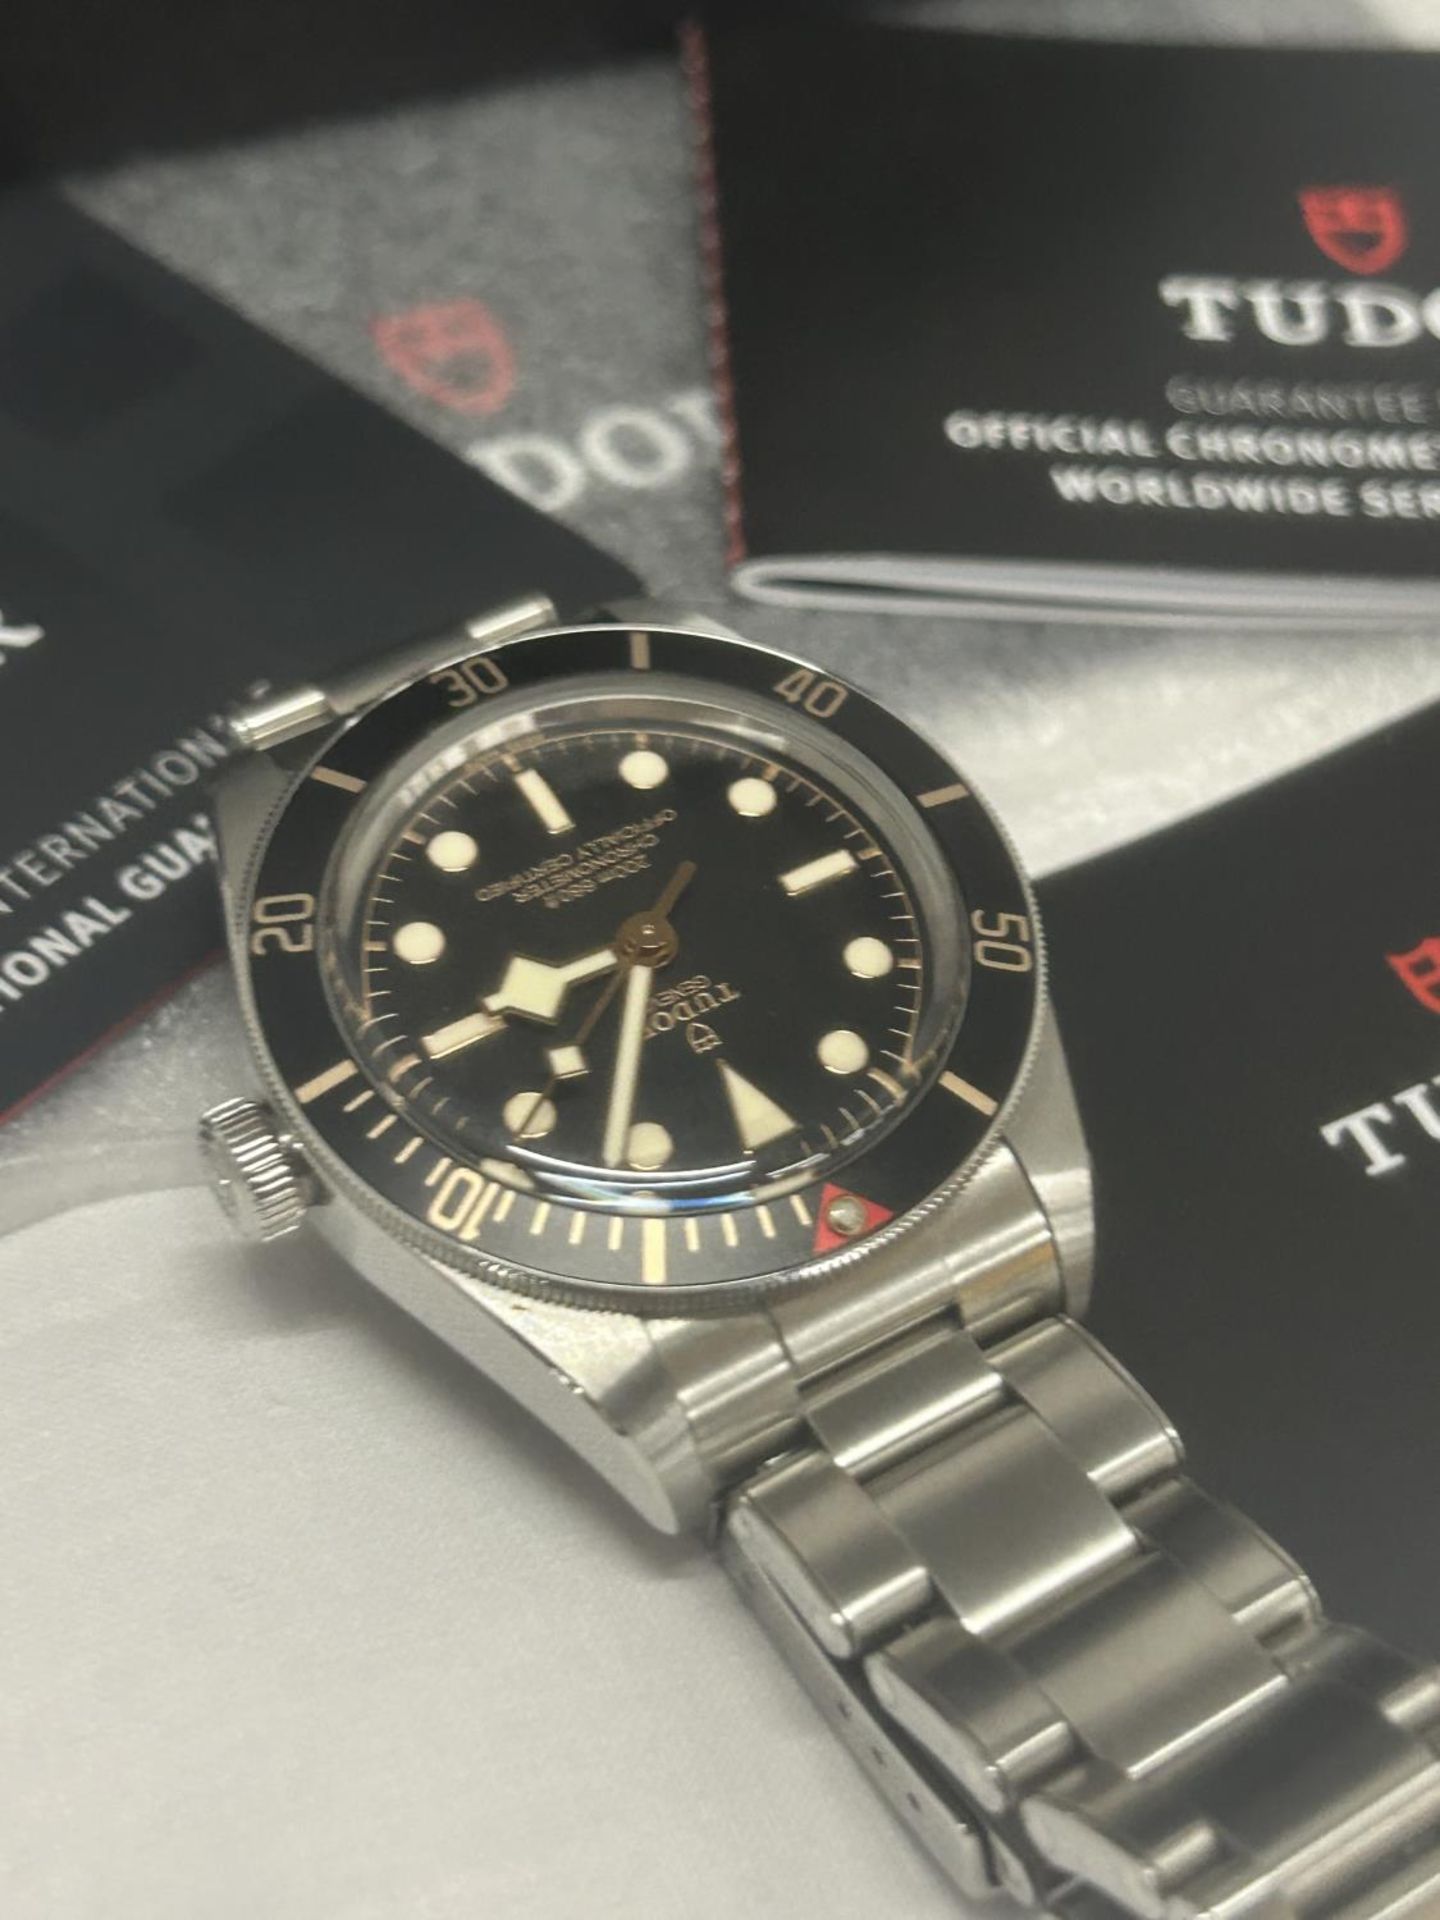 A TUDOR BLACK BAY 58 CHRONOGRAPH AUTOMATIC WATCH WITH 39MM BLACK DIAL, COMPLETE WITH ORIGINAL BOX - Image 6 of 7